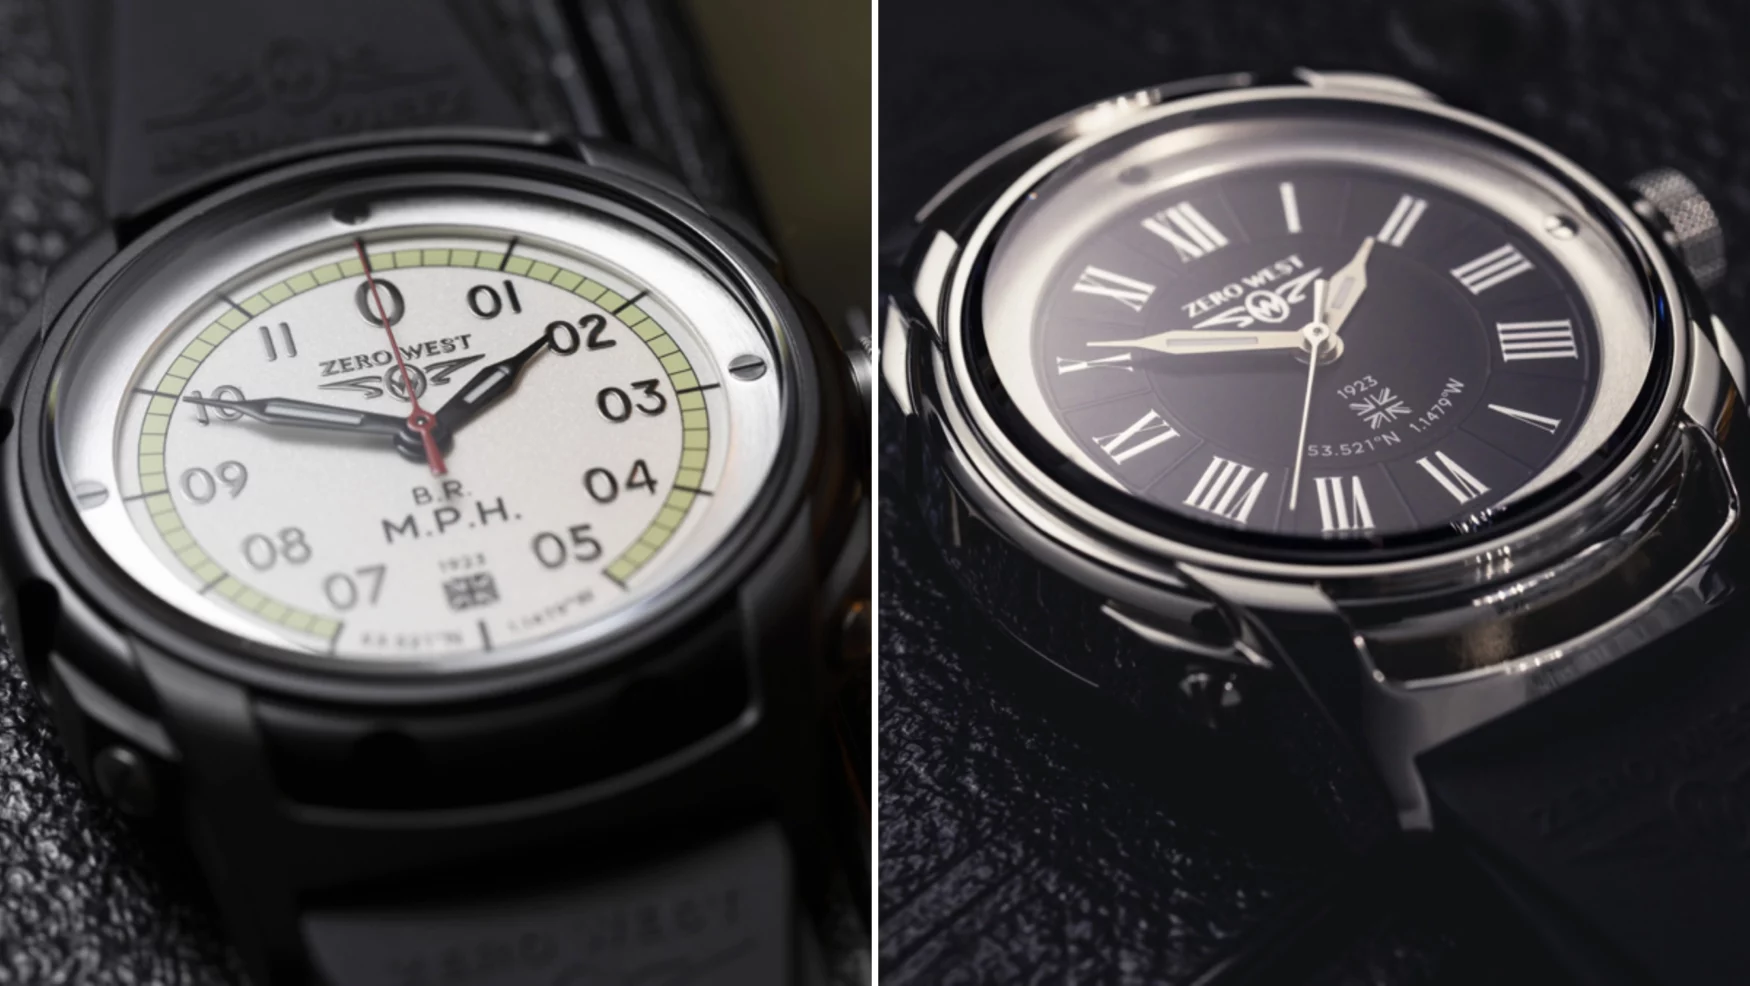 Zero West launches two railway-inspired watches that pay homage to a world-famous locomotive